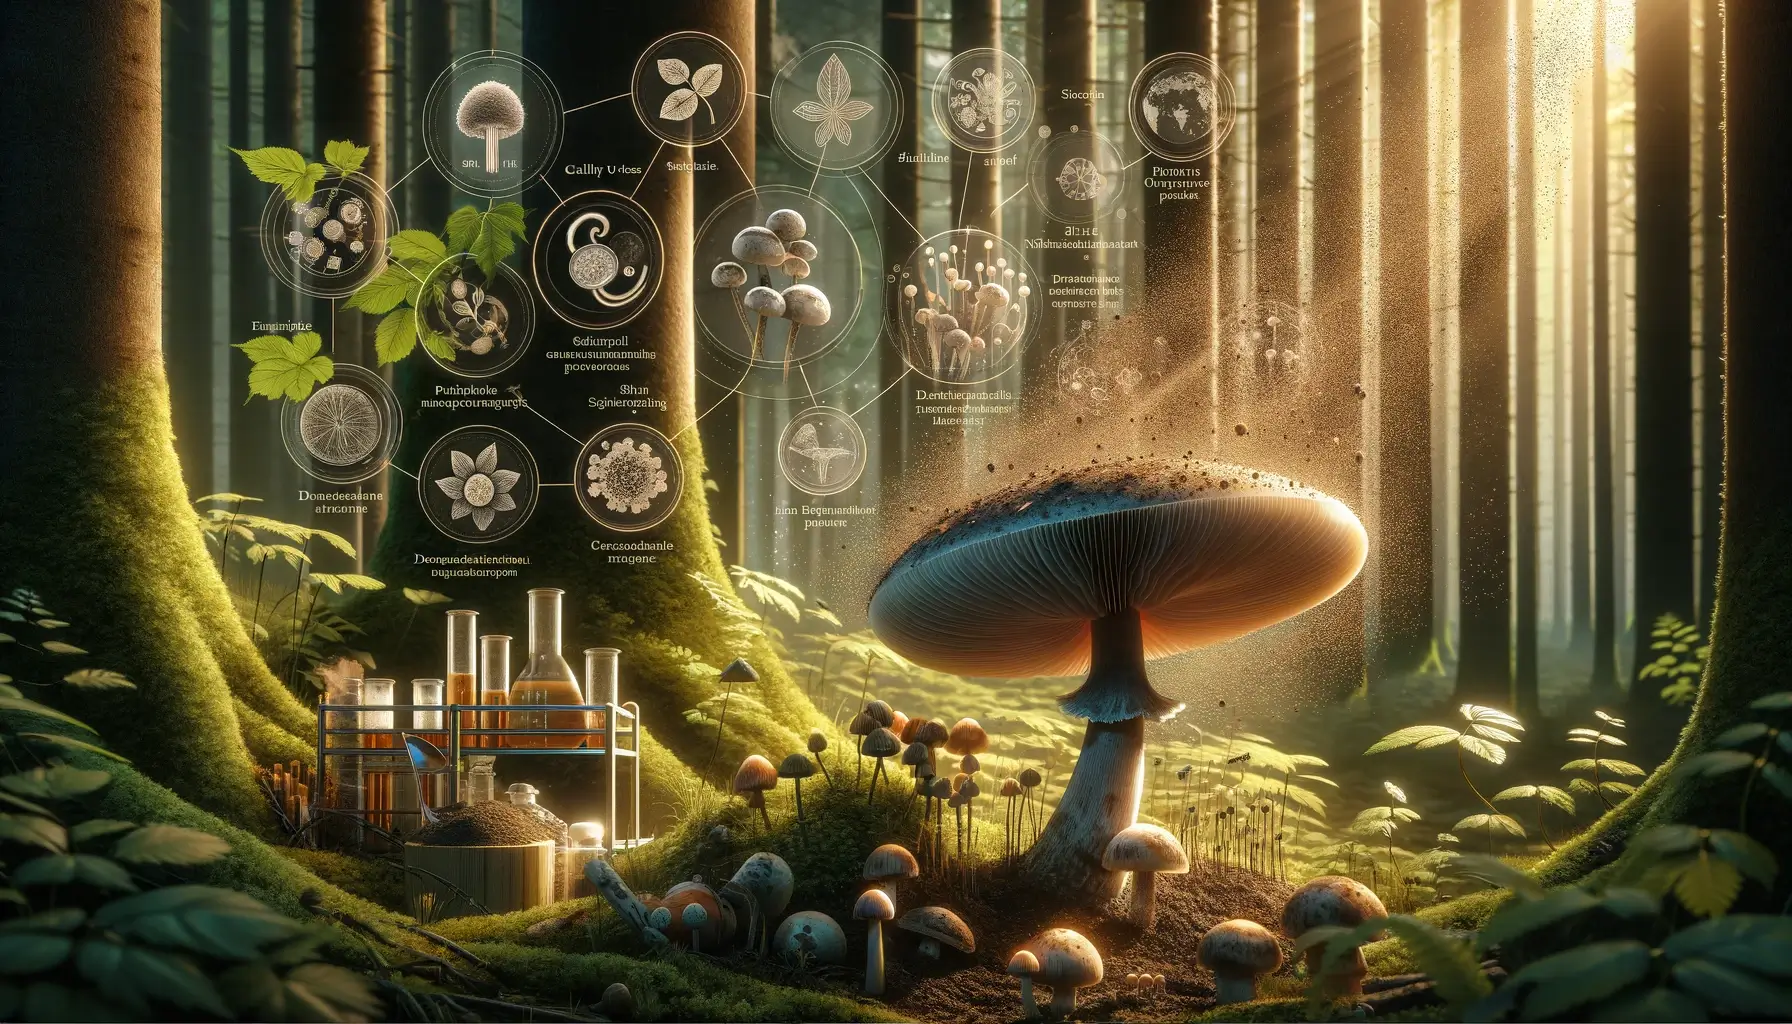 A visually captivating and informative 16:9 featured image illustrating the various uses of mushroom spores. The image should depict a serene forest setting with a close-up of a mushroom on one side, releasing its spores into the air. Surrounding the mushroom, small, detailed illustrations or icons should represent the different applications of mushroom spores, such as in culinary uses, medicinal purposes, ecological benefits like soil enrichment and decomposing organic matter, and scientific research. The image should convey the idea that mushroom spores are not only a fundamental part of the mushroom's life cycle but also have versatile uses that benefit humans, the environment, and science. The background should subtly incorporate elements that suggest a symbiotic relationship with the ecosystem, like plants thriving due to enriched soil and a laboratory setting in the backdrop to hint at scientific research.